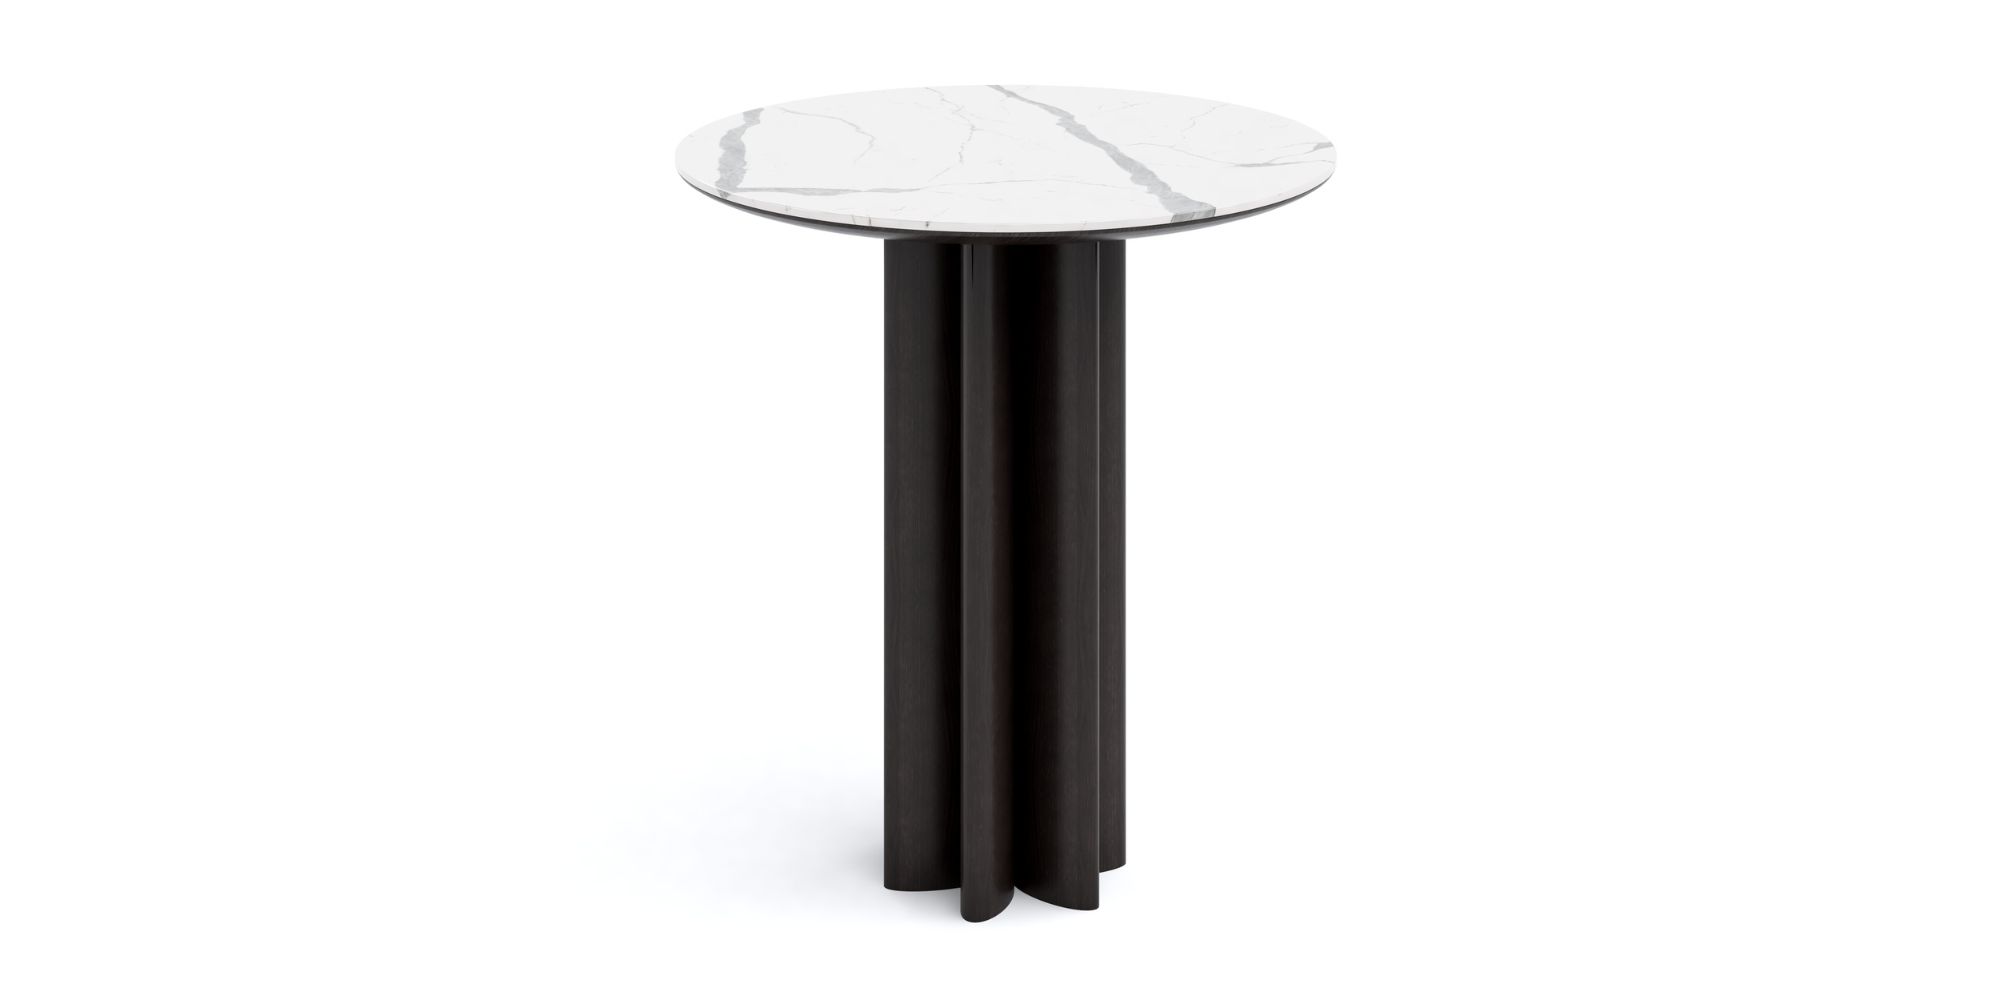 Tamarindo Round Dining Table in Outdoor Tables Dining Tables for Tamarindo collection